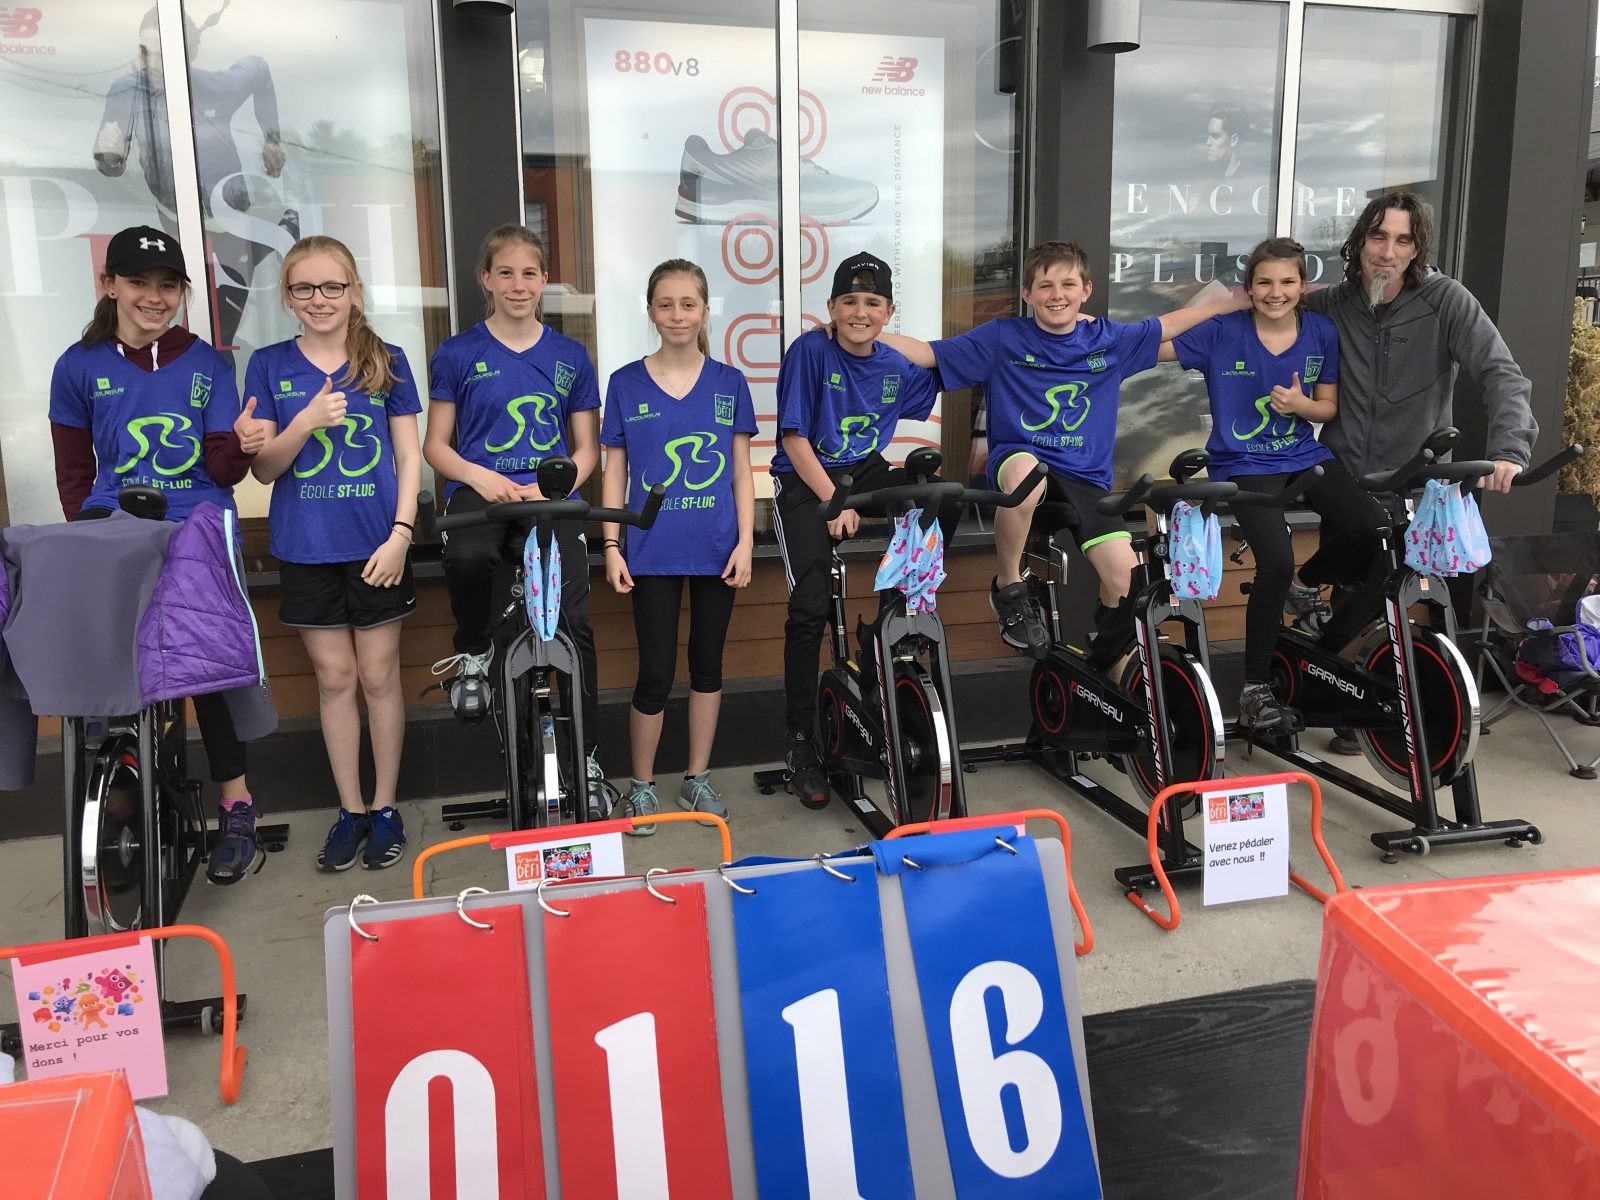 Elementary students pedal 1,000km  to promote healthy living